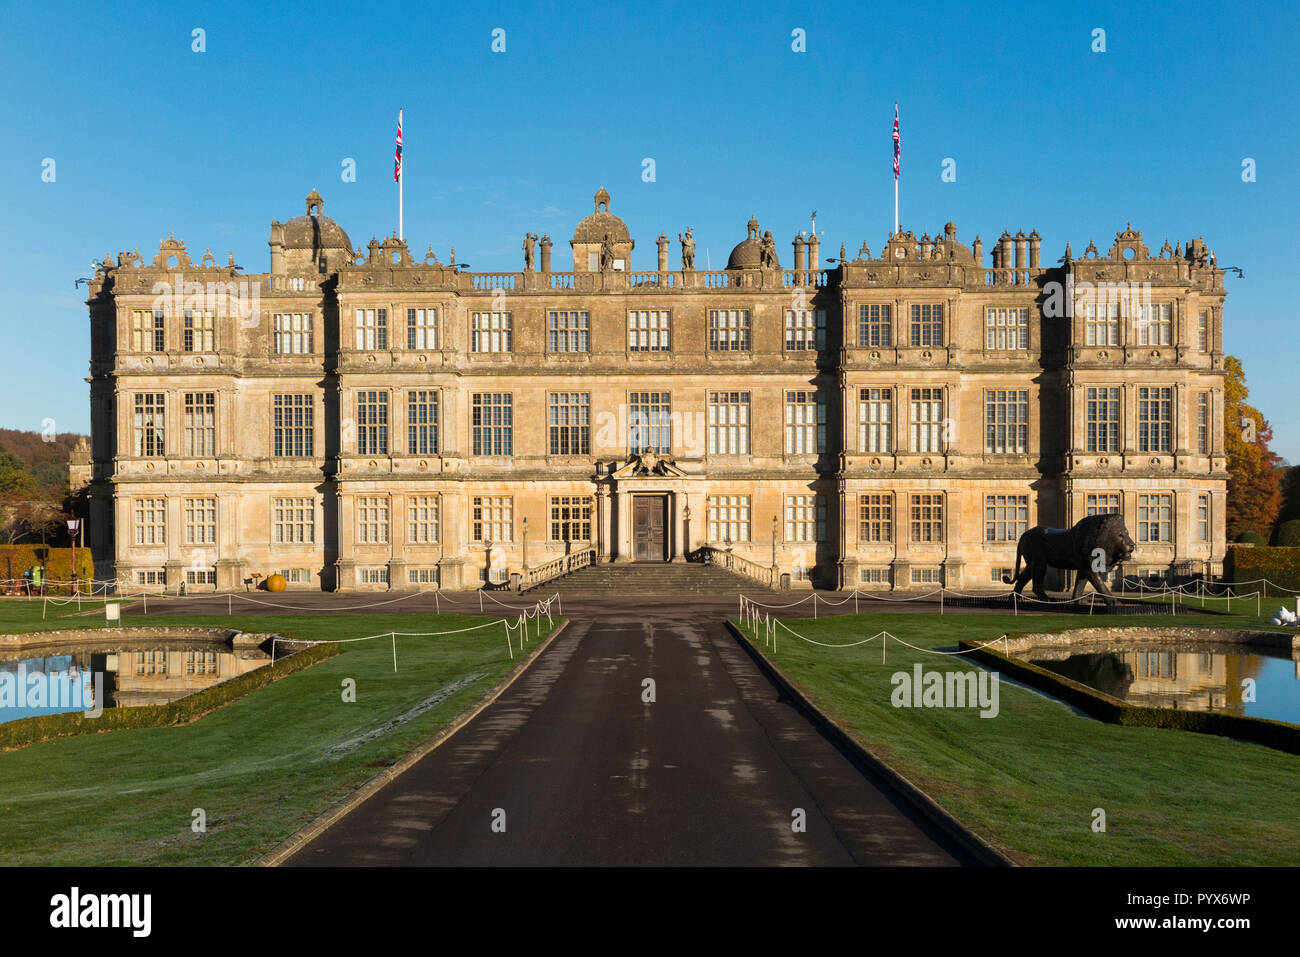 Exterior outside view of the front facade along the drive of Longleat house in Wiltshire. UK. (103) Stock Photo